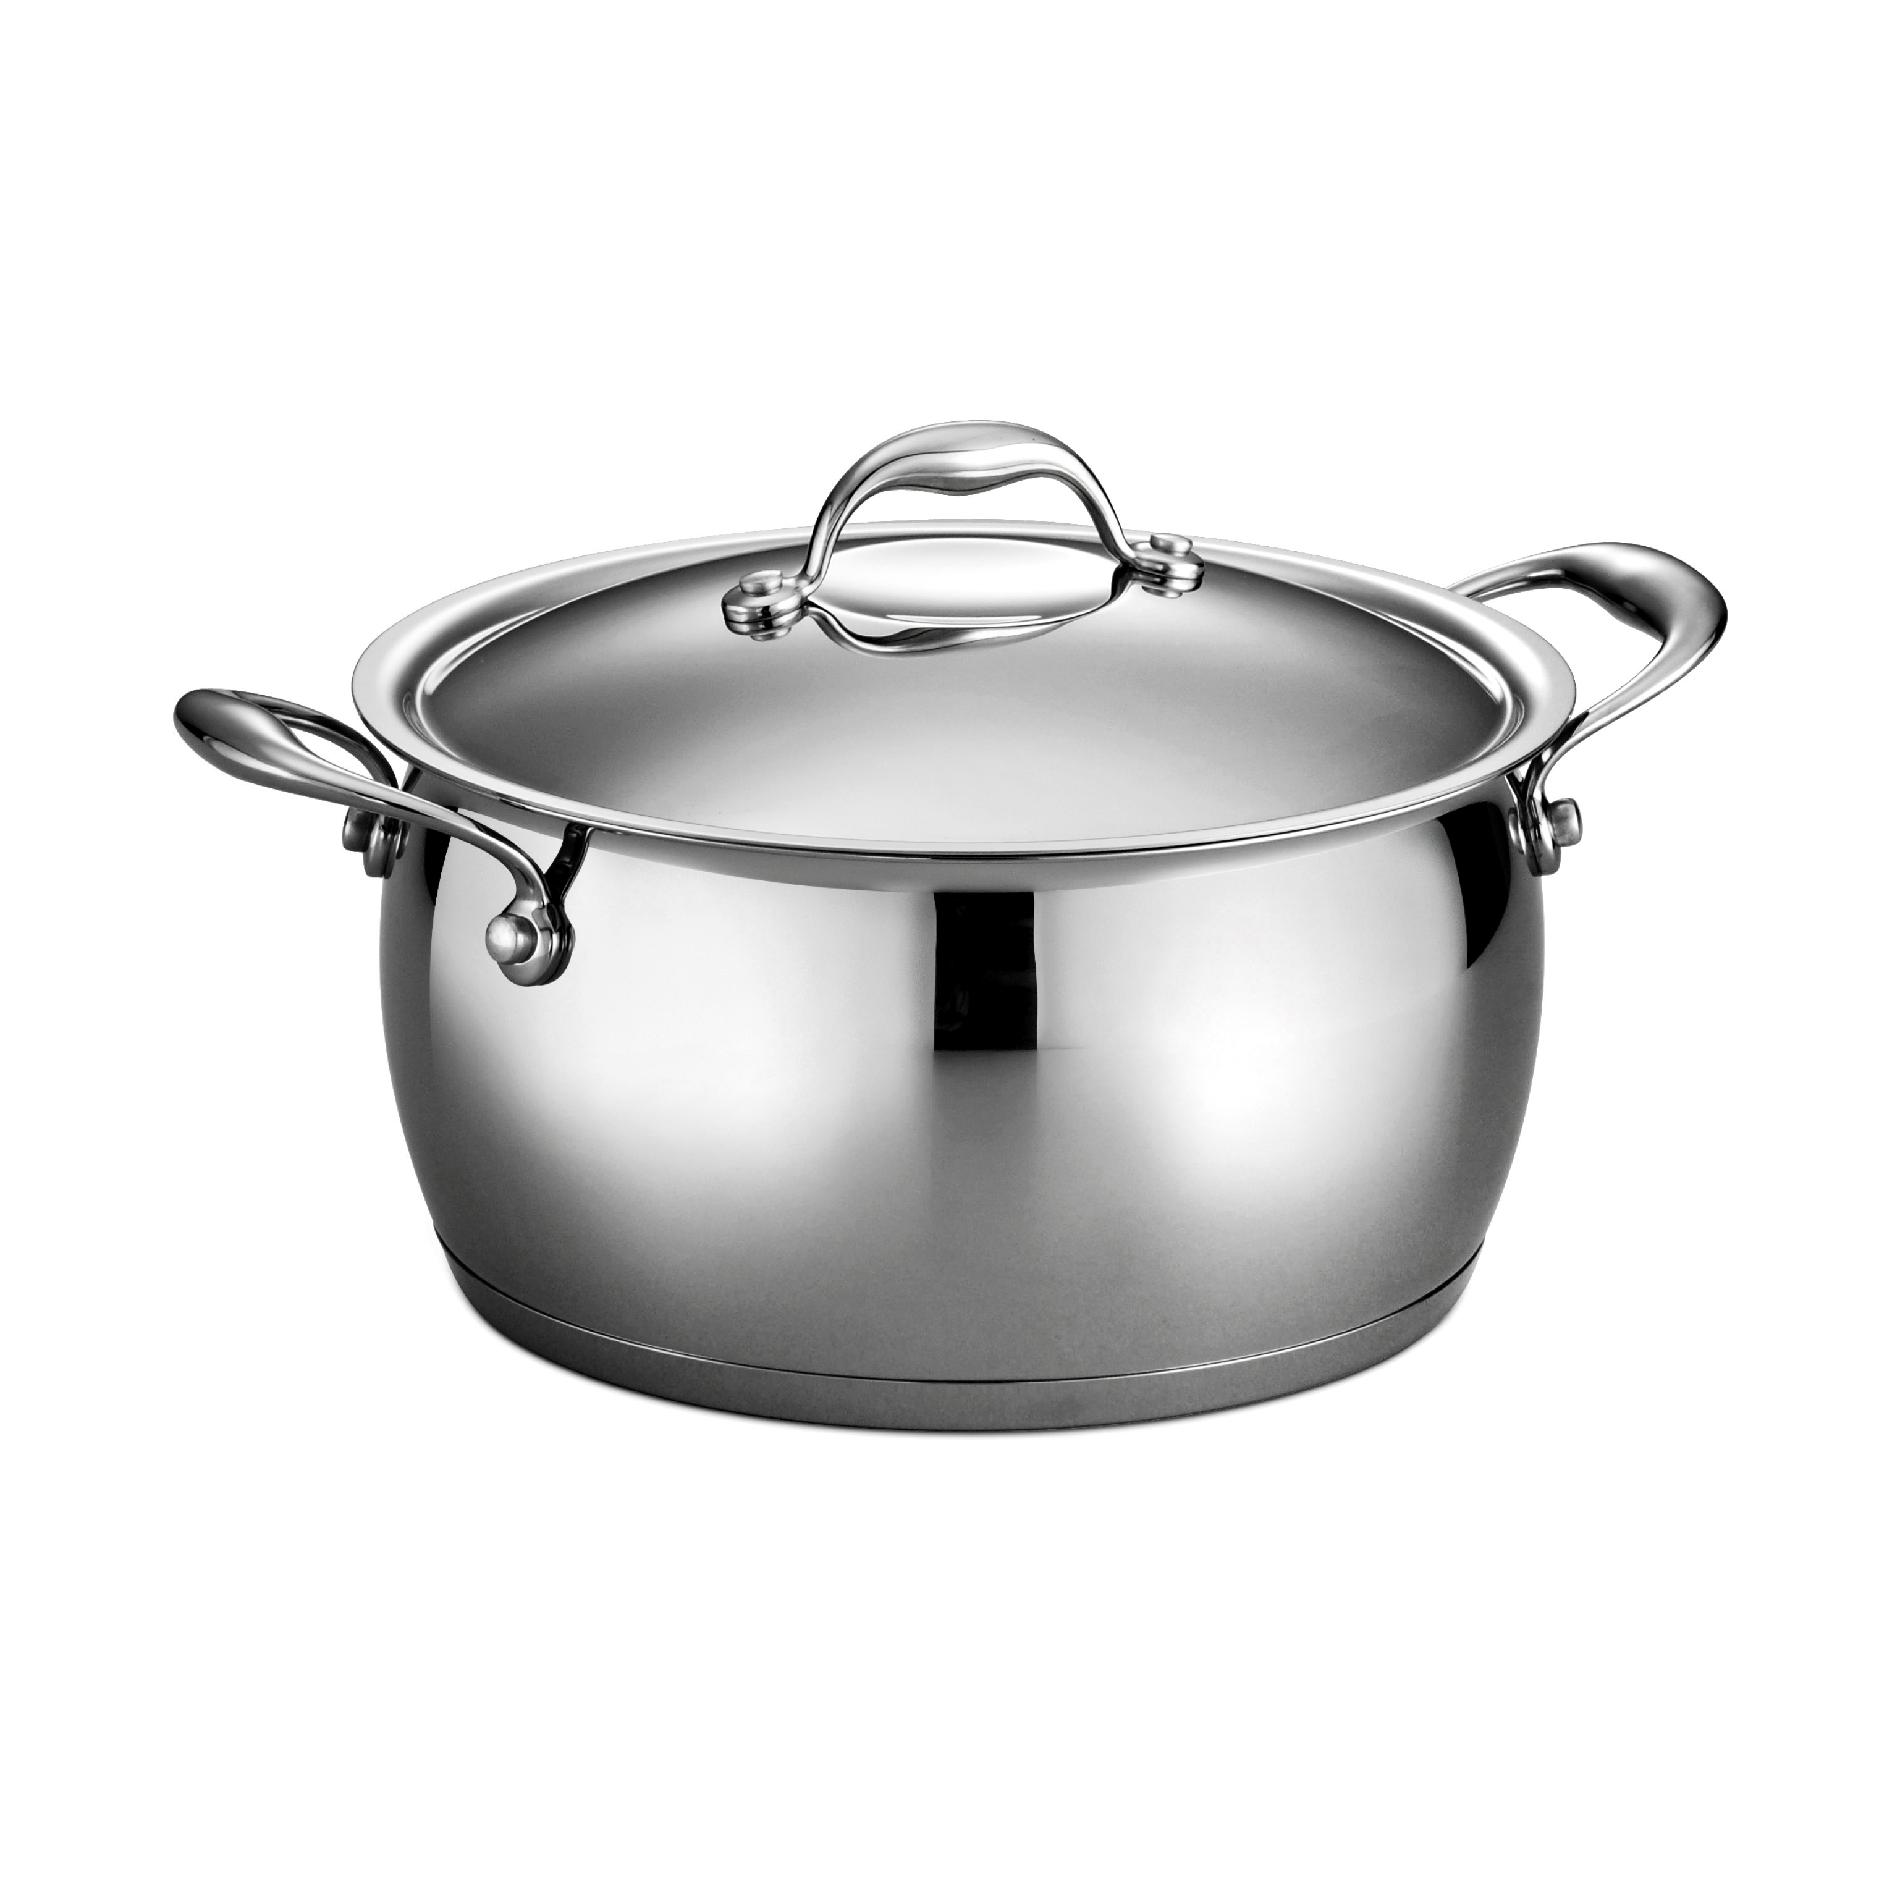 Gourmet Domus 18/10 Stainless Steel 5.5 Qt Covered Stock Pot